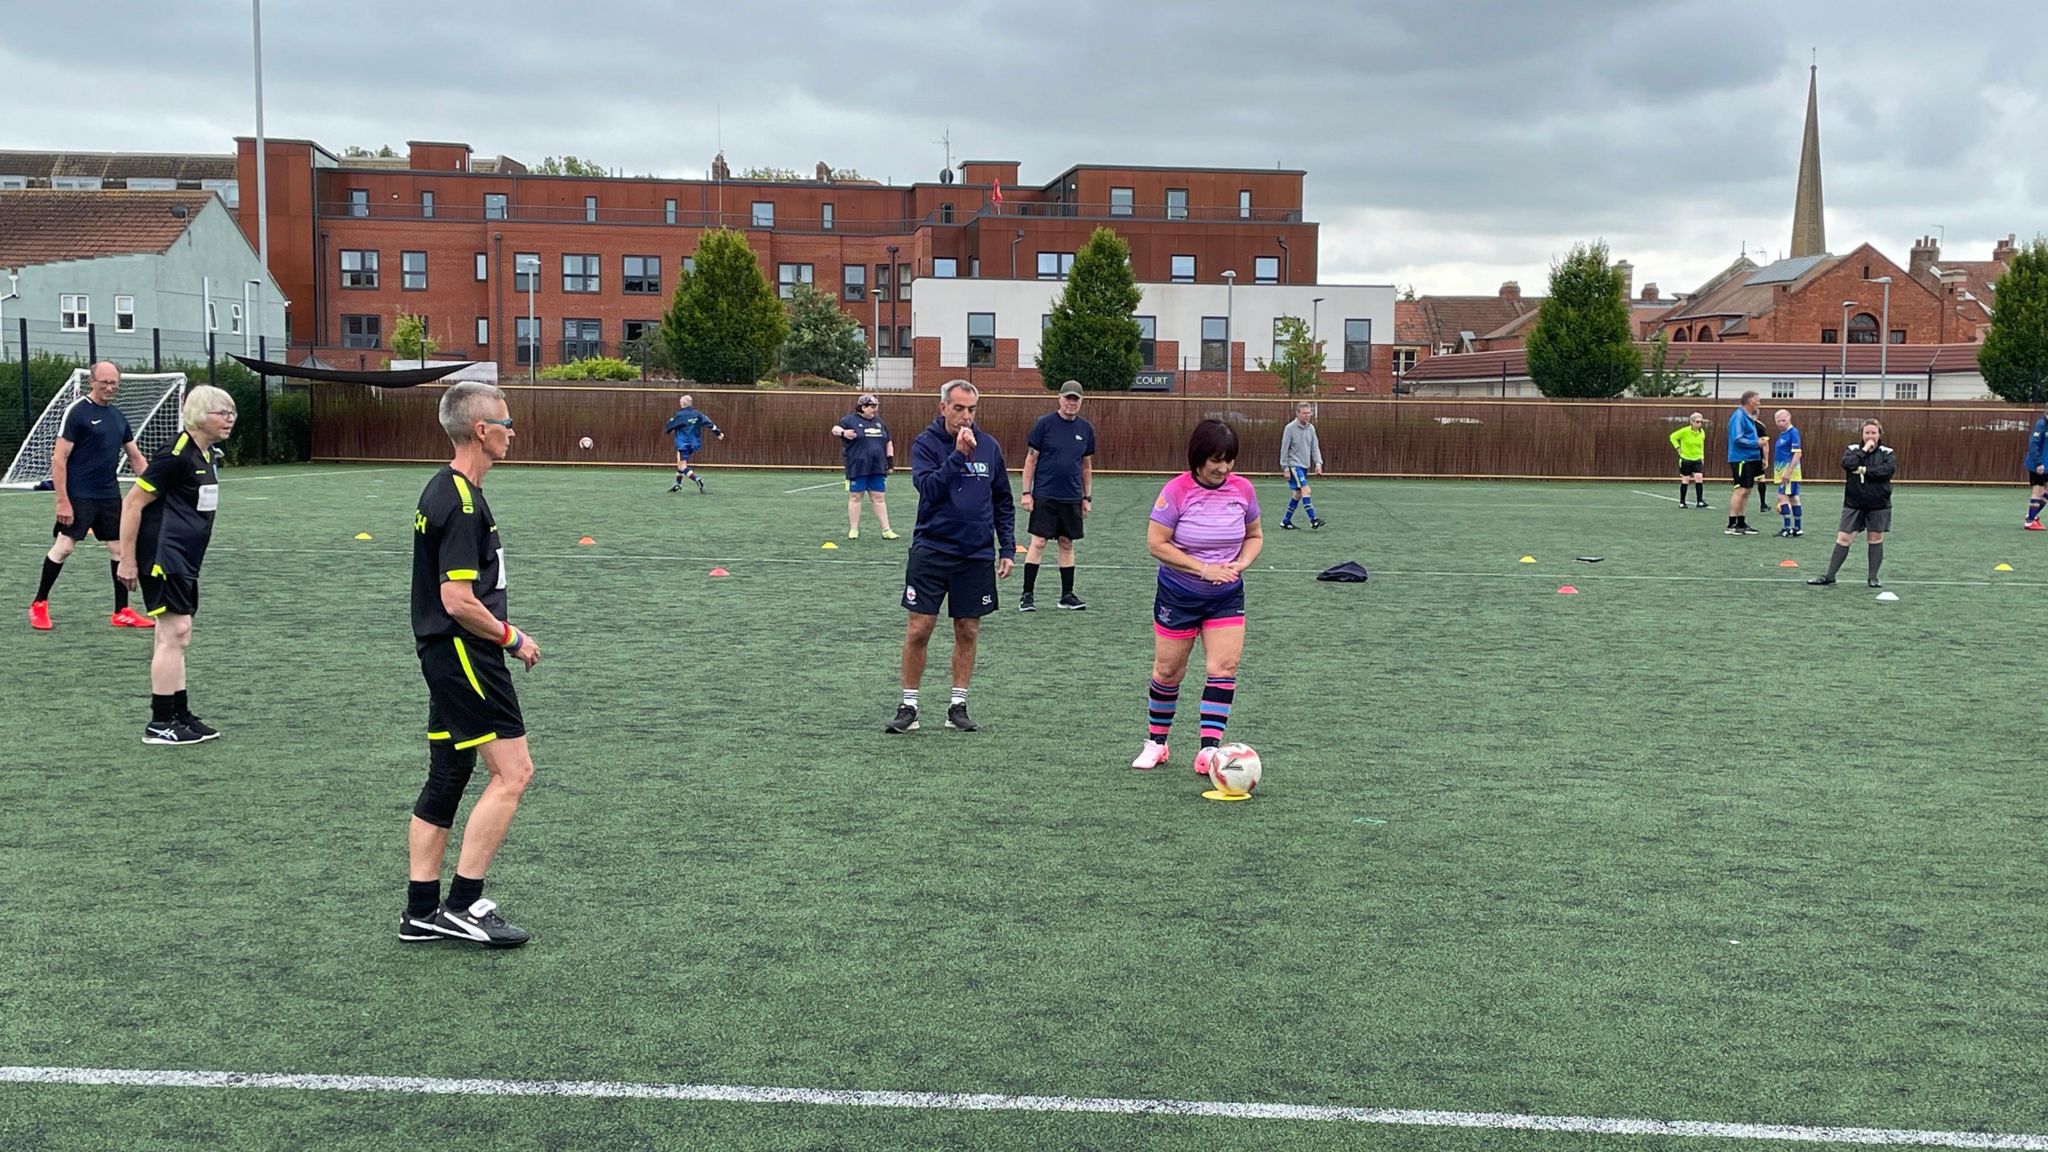 Walking football players on the pitch wearing black and pink kits.